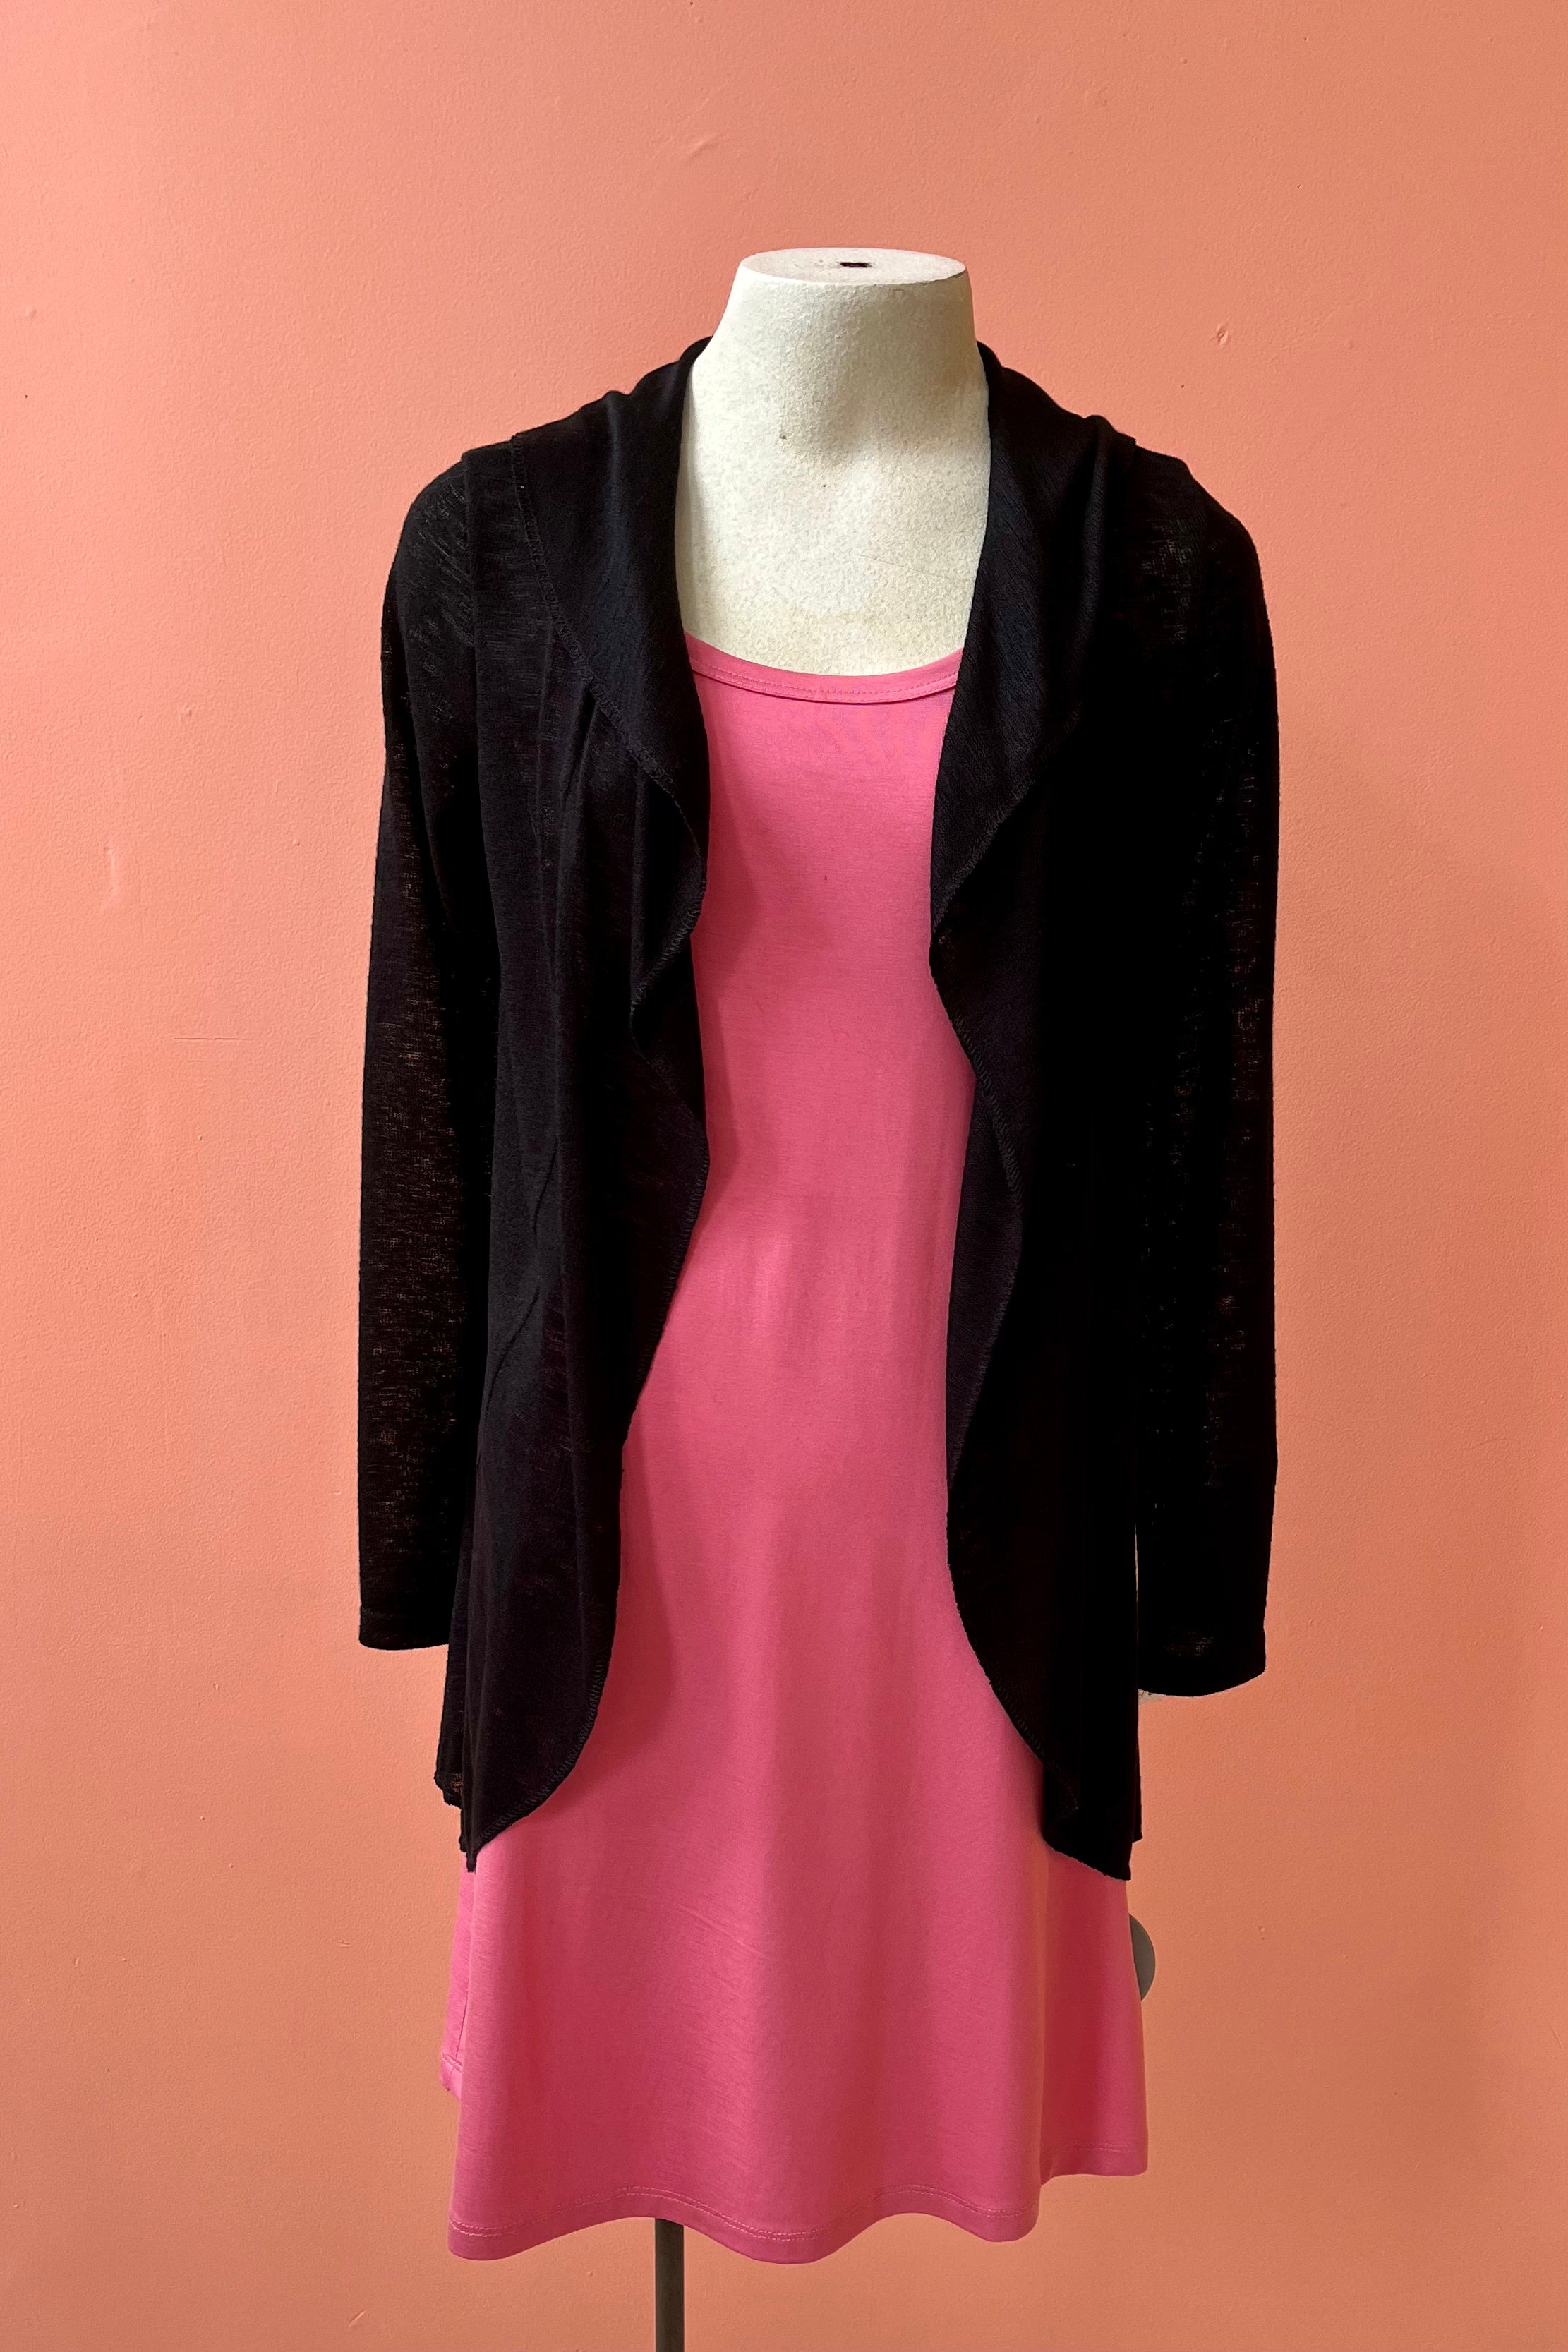 Chi Chi Cardigan by Yul Voy, Black, open cardigan, lightweight knit, wide collar, long sleeves, rounded hem is shorter in the front, sizes XS to XXL, made in Montreal